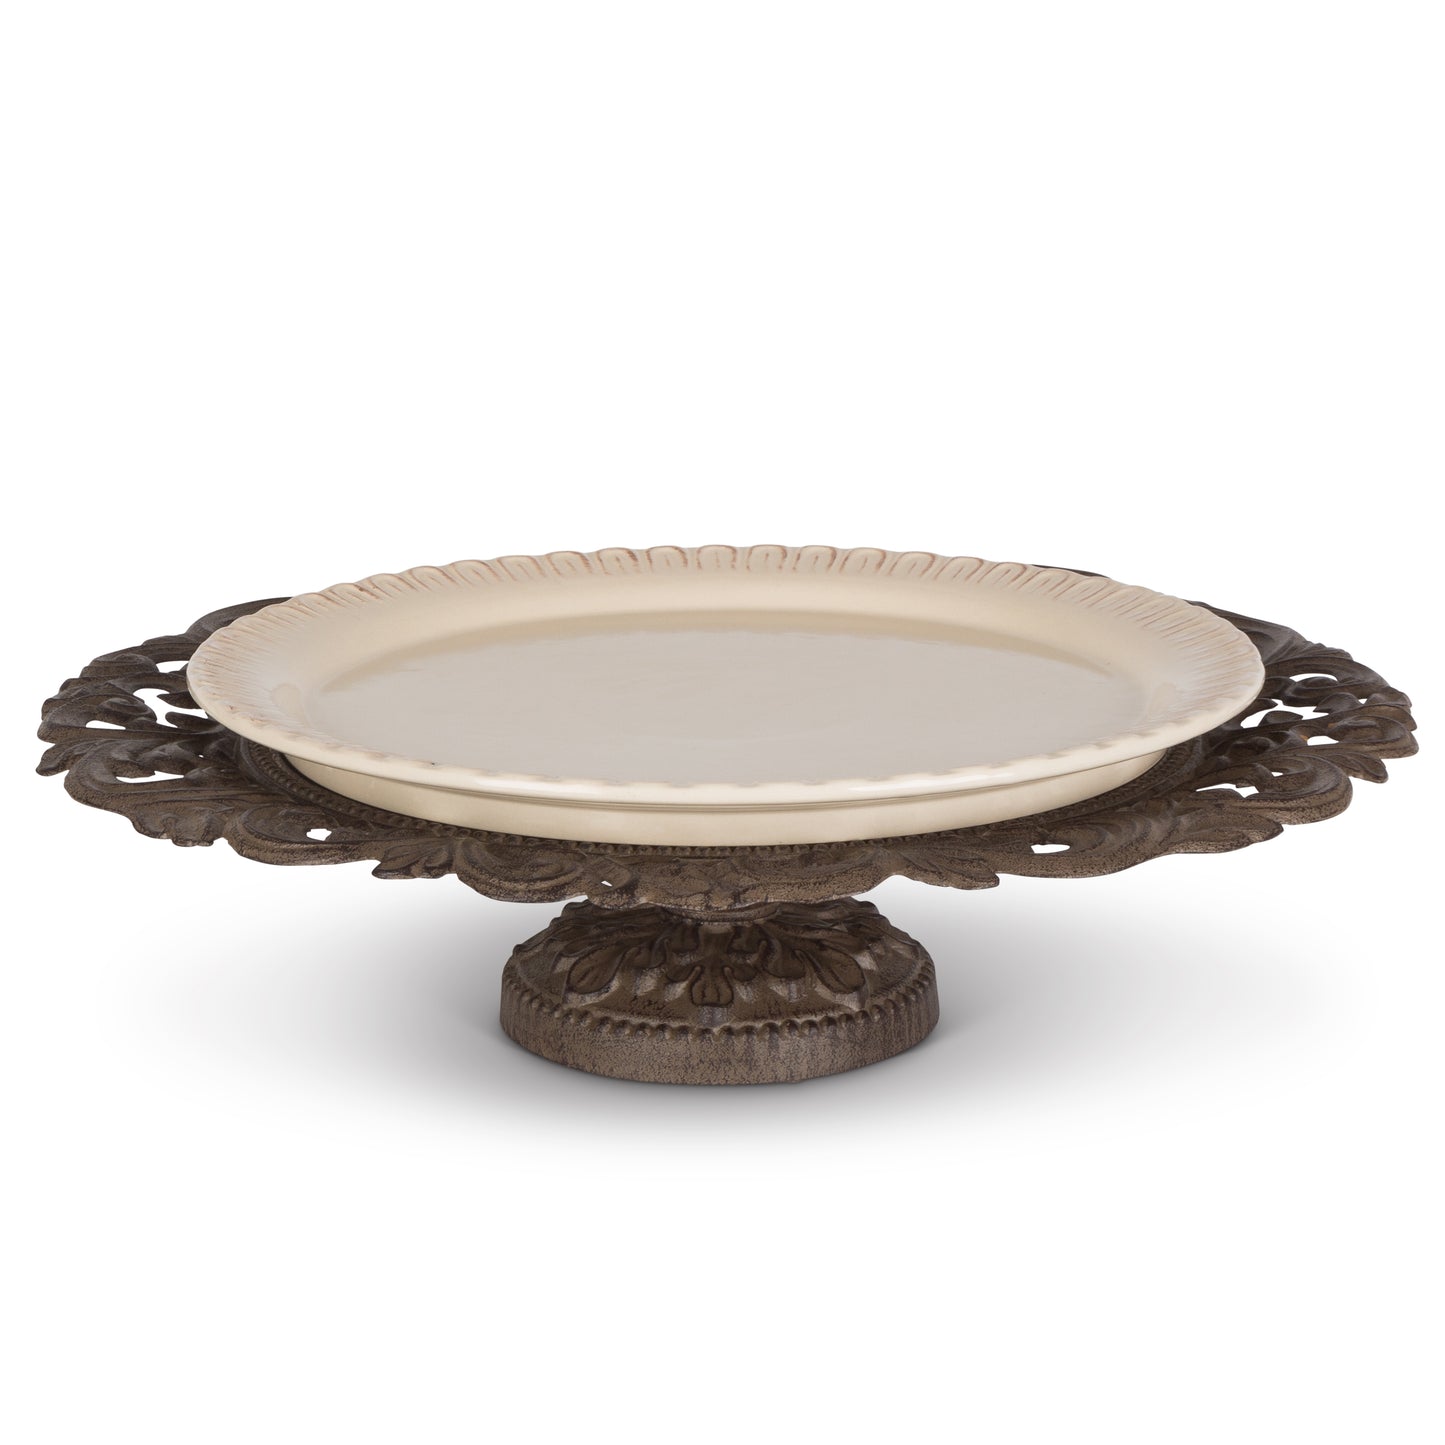 Gerson Company GG Collection Acanthus Leaf Serving Platter With Ceramic Plate